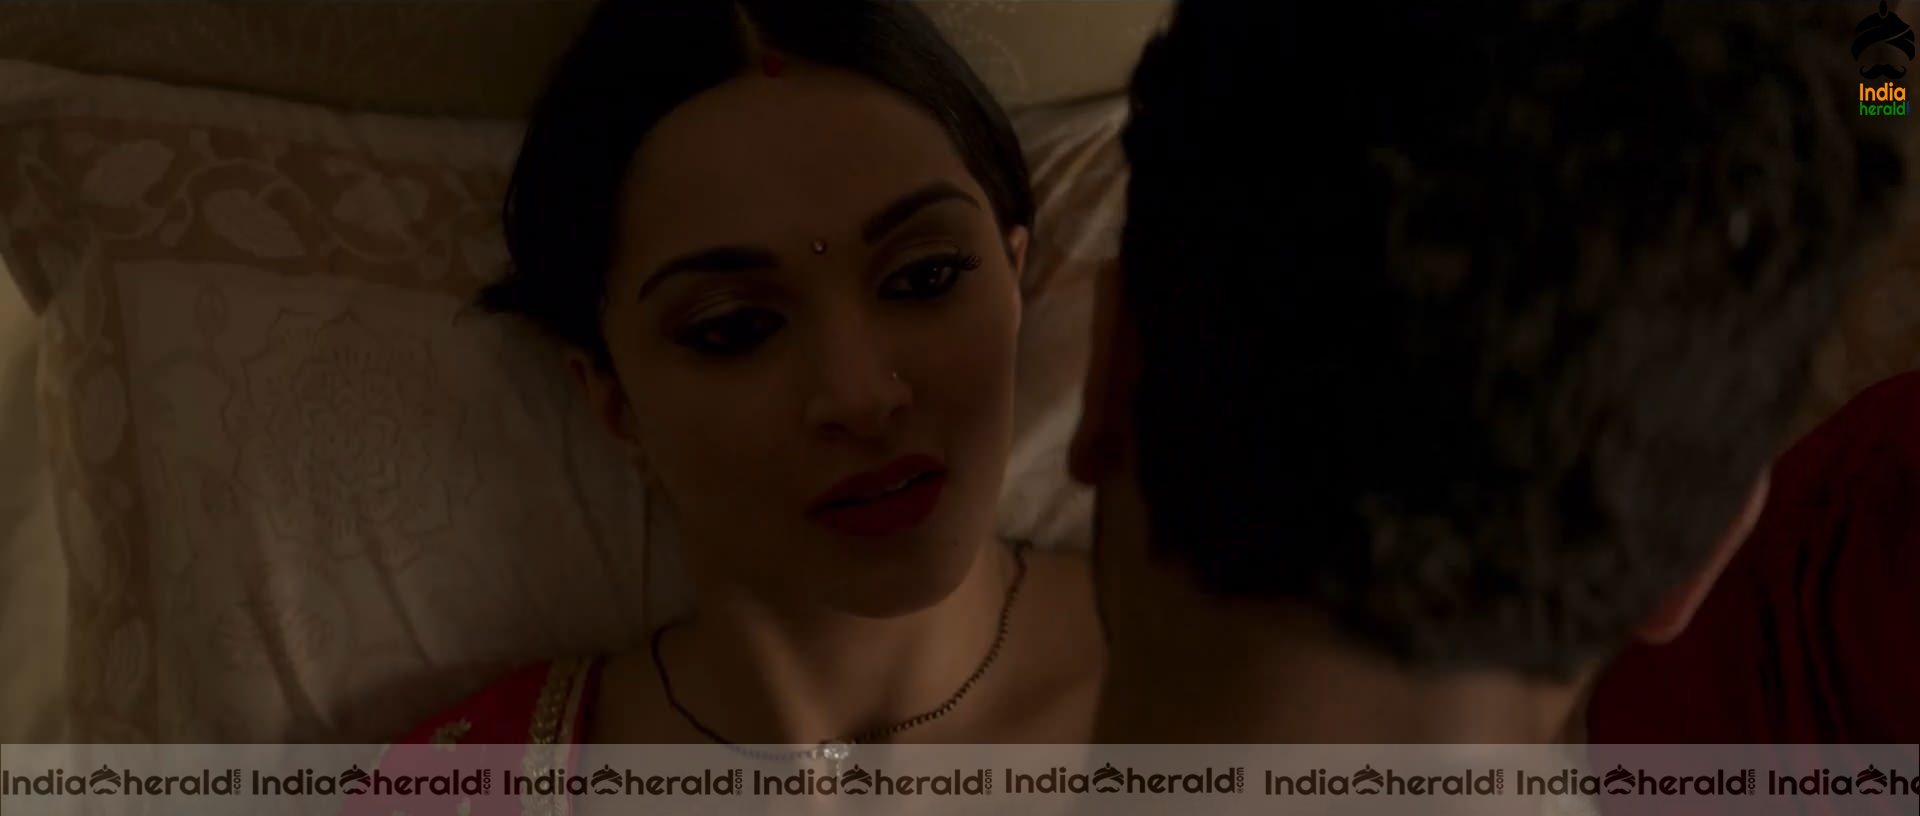 Kiara Advani Hot Photos Collection from Lust Stories exposing her Lustful Body Set 3